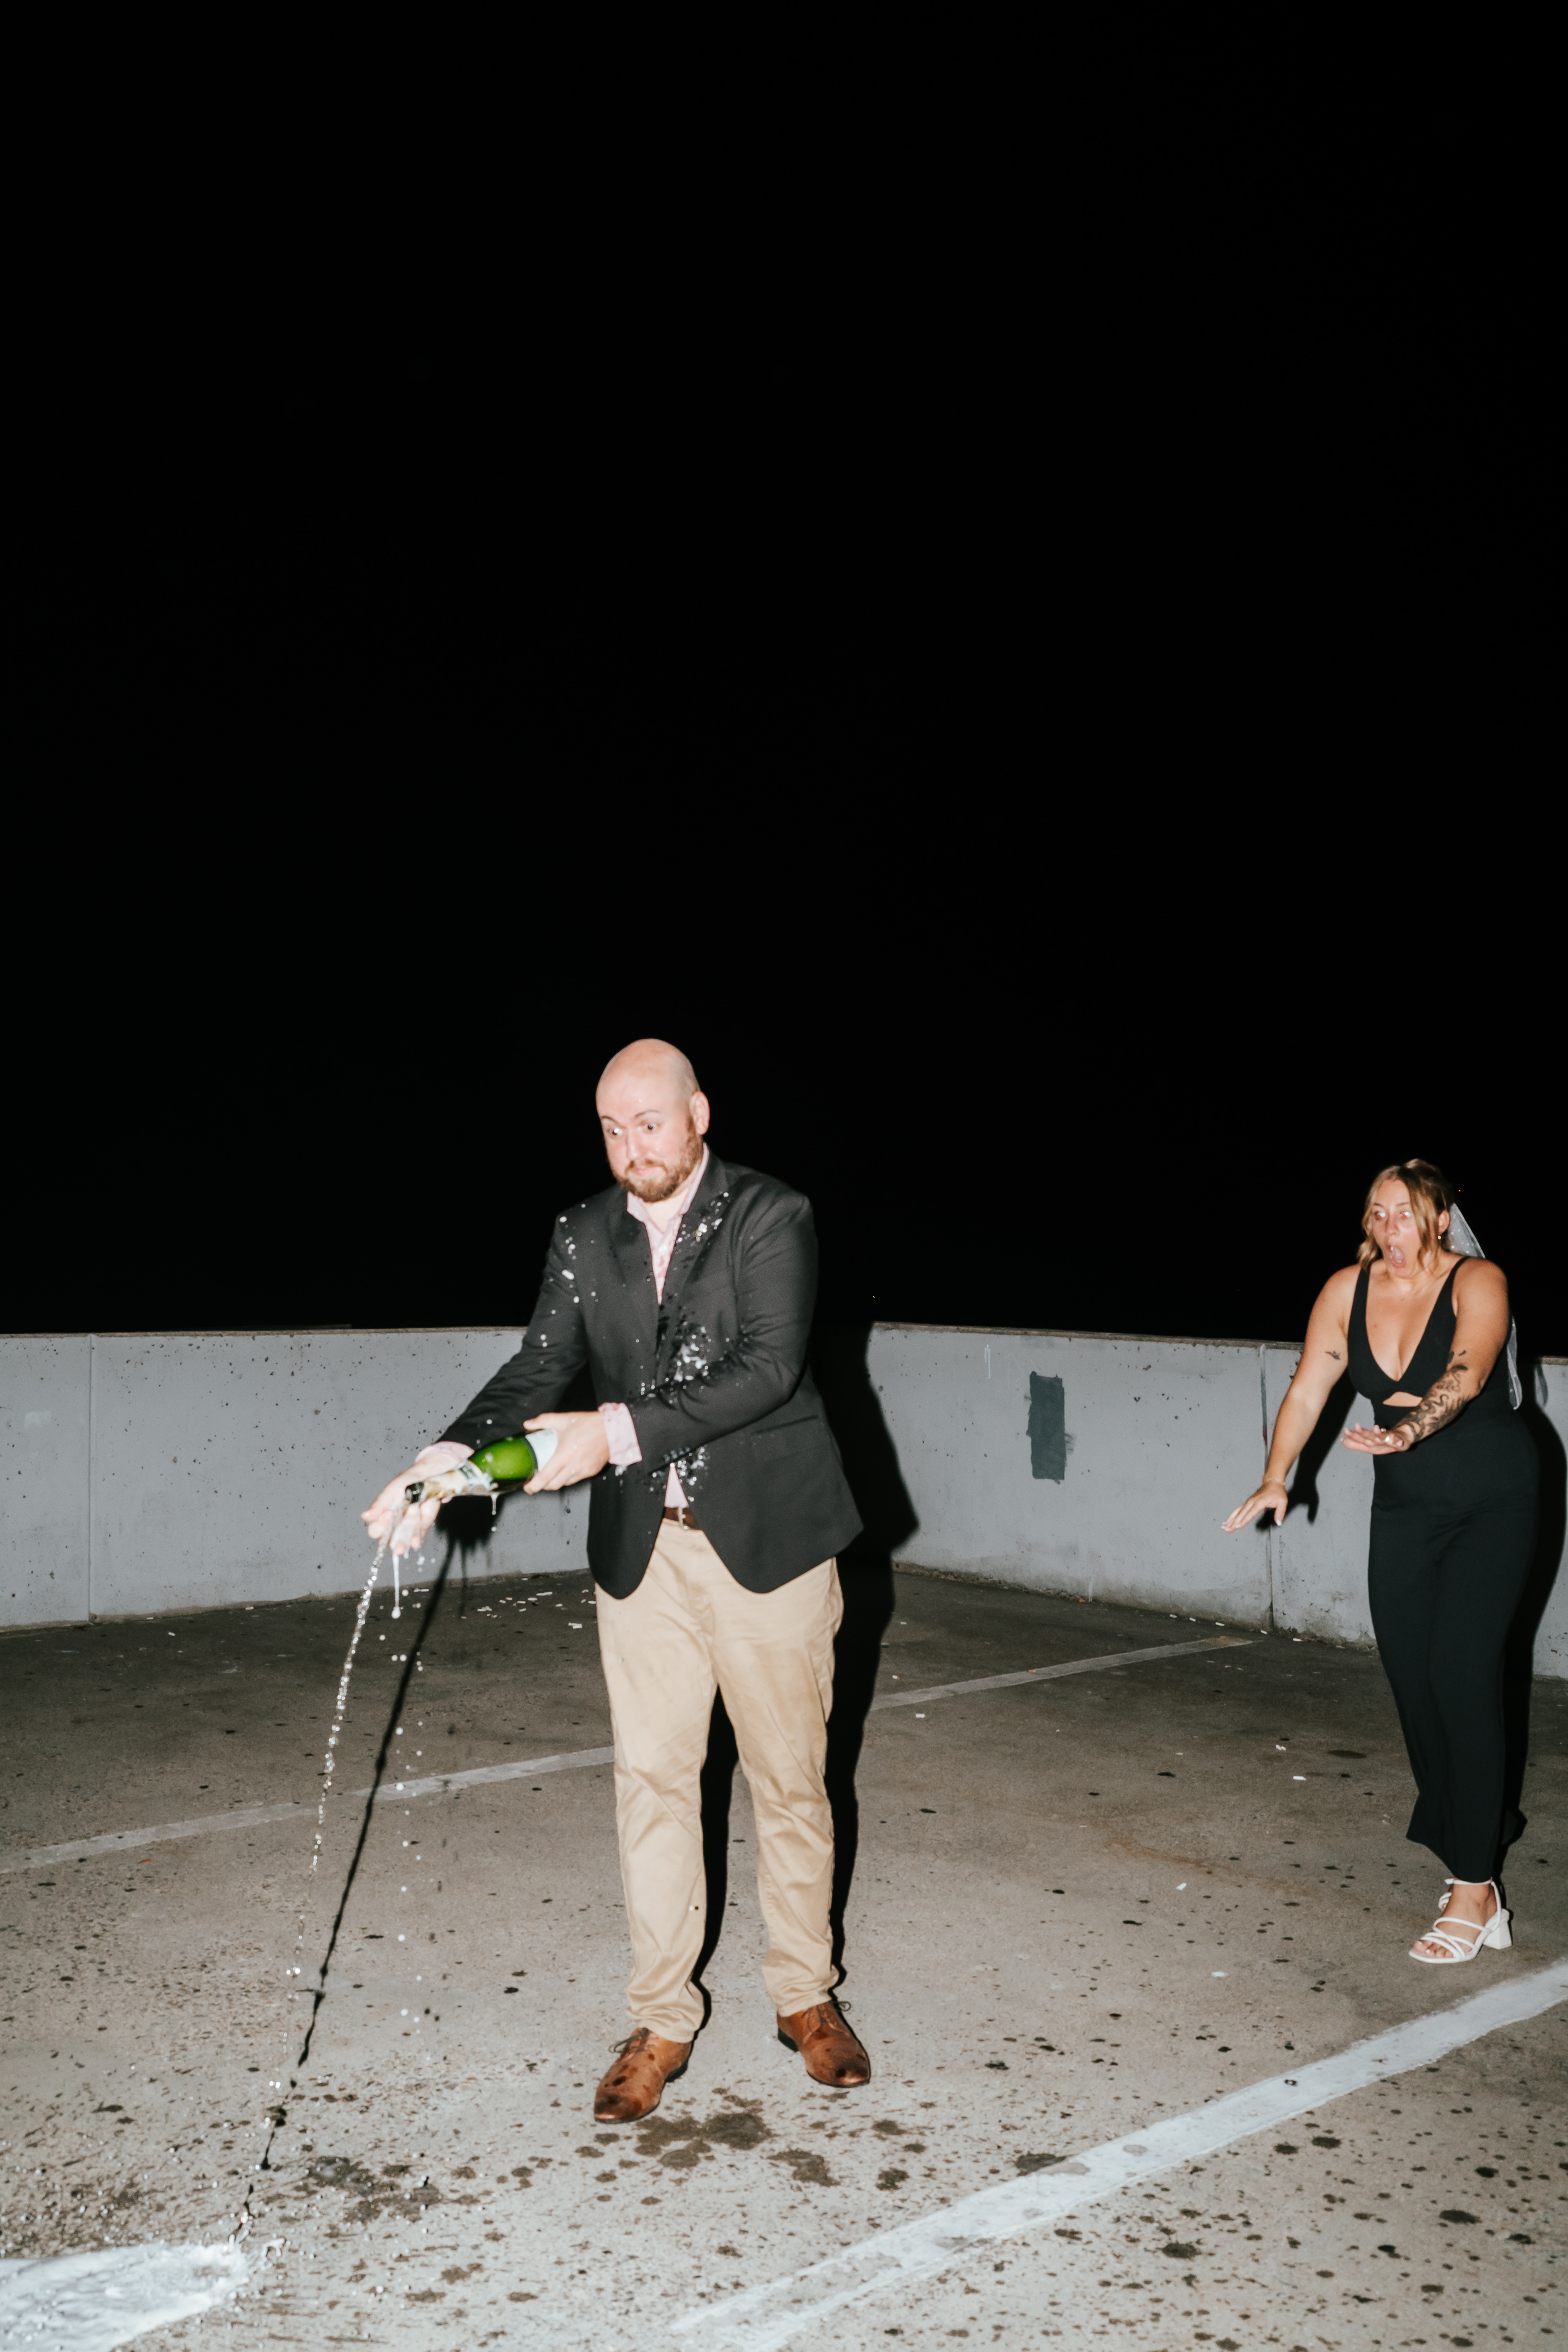 Direct Flash Rooftop Engagement Photos Maryland Wedding Photographer champagne pop gone wrong